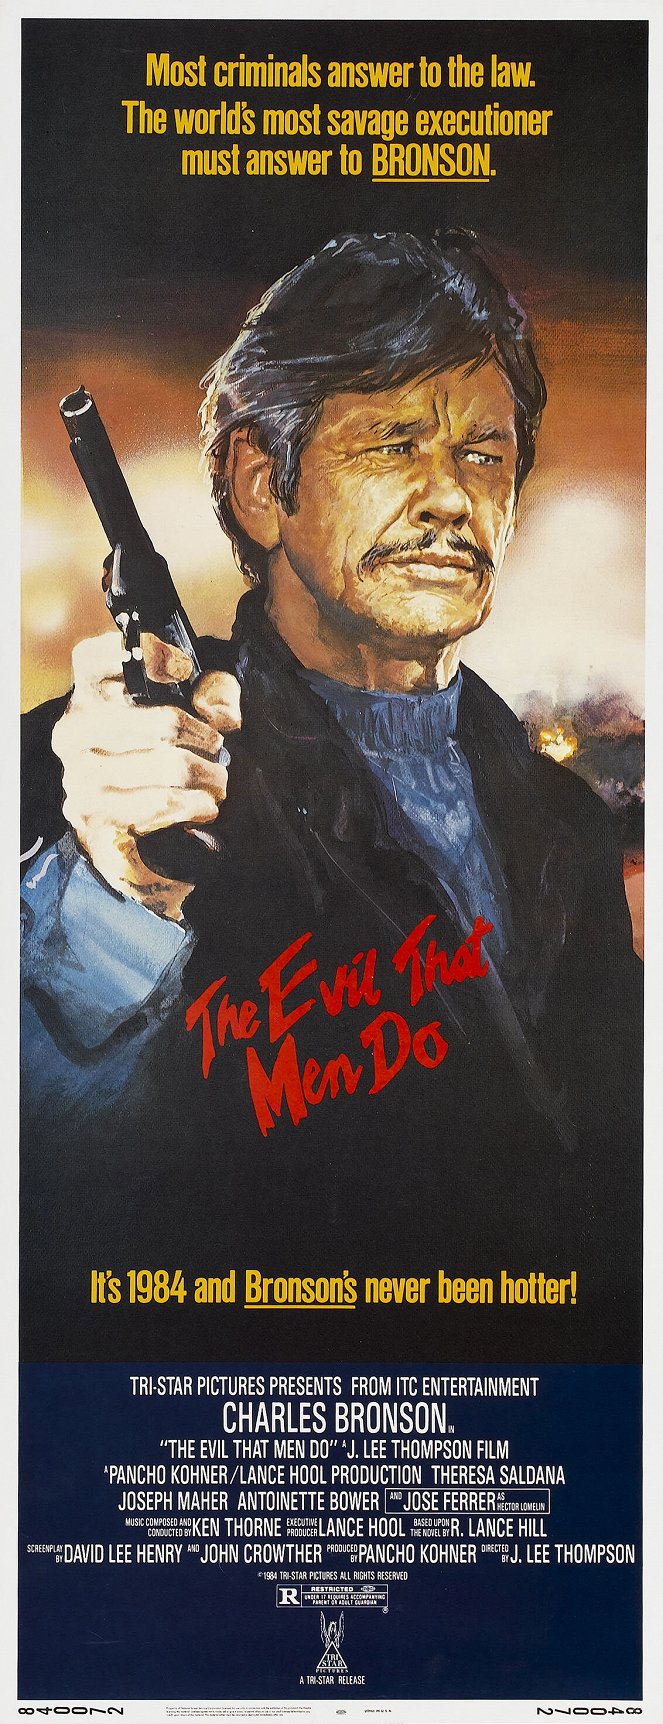 The Evil That Men Do - Posters